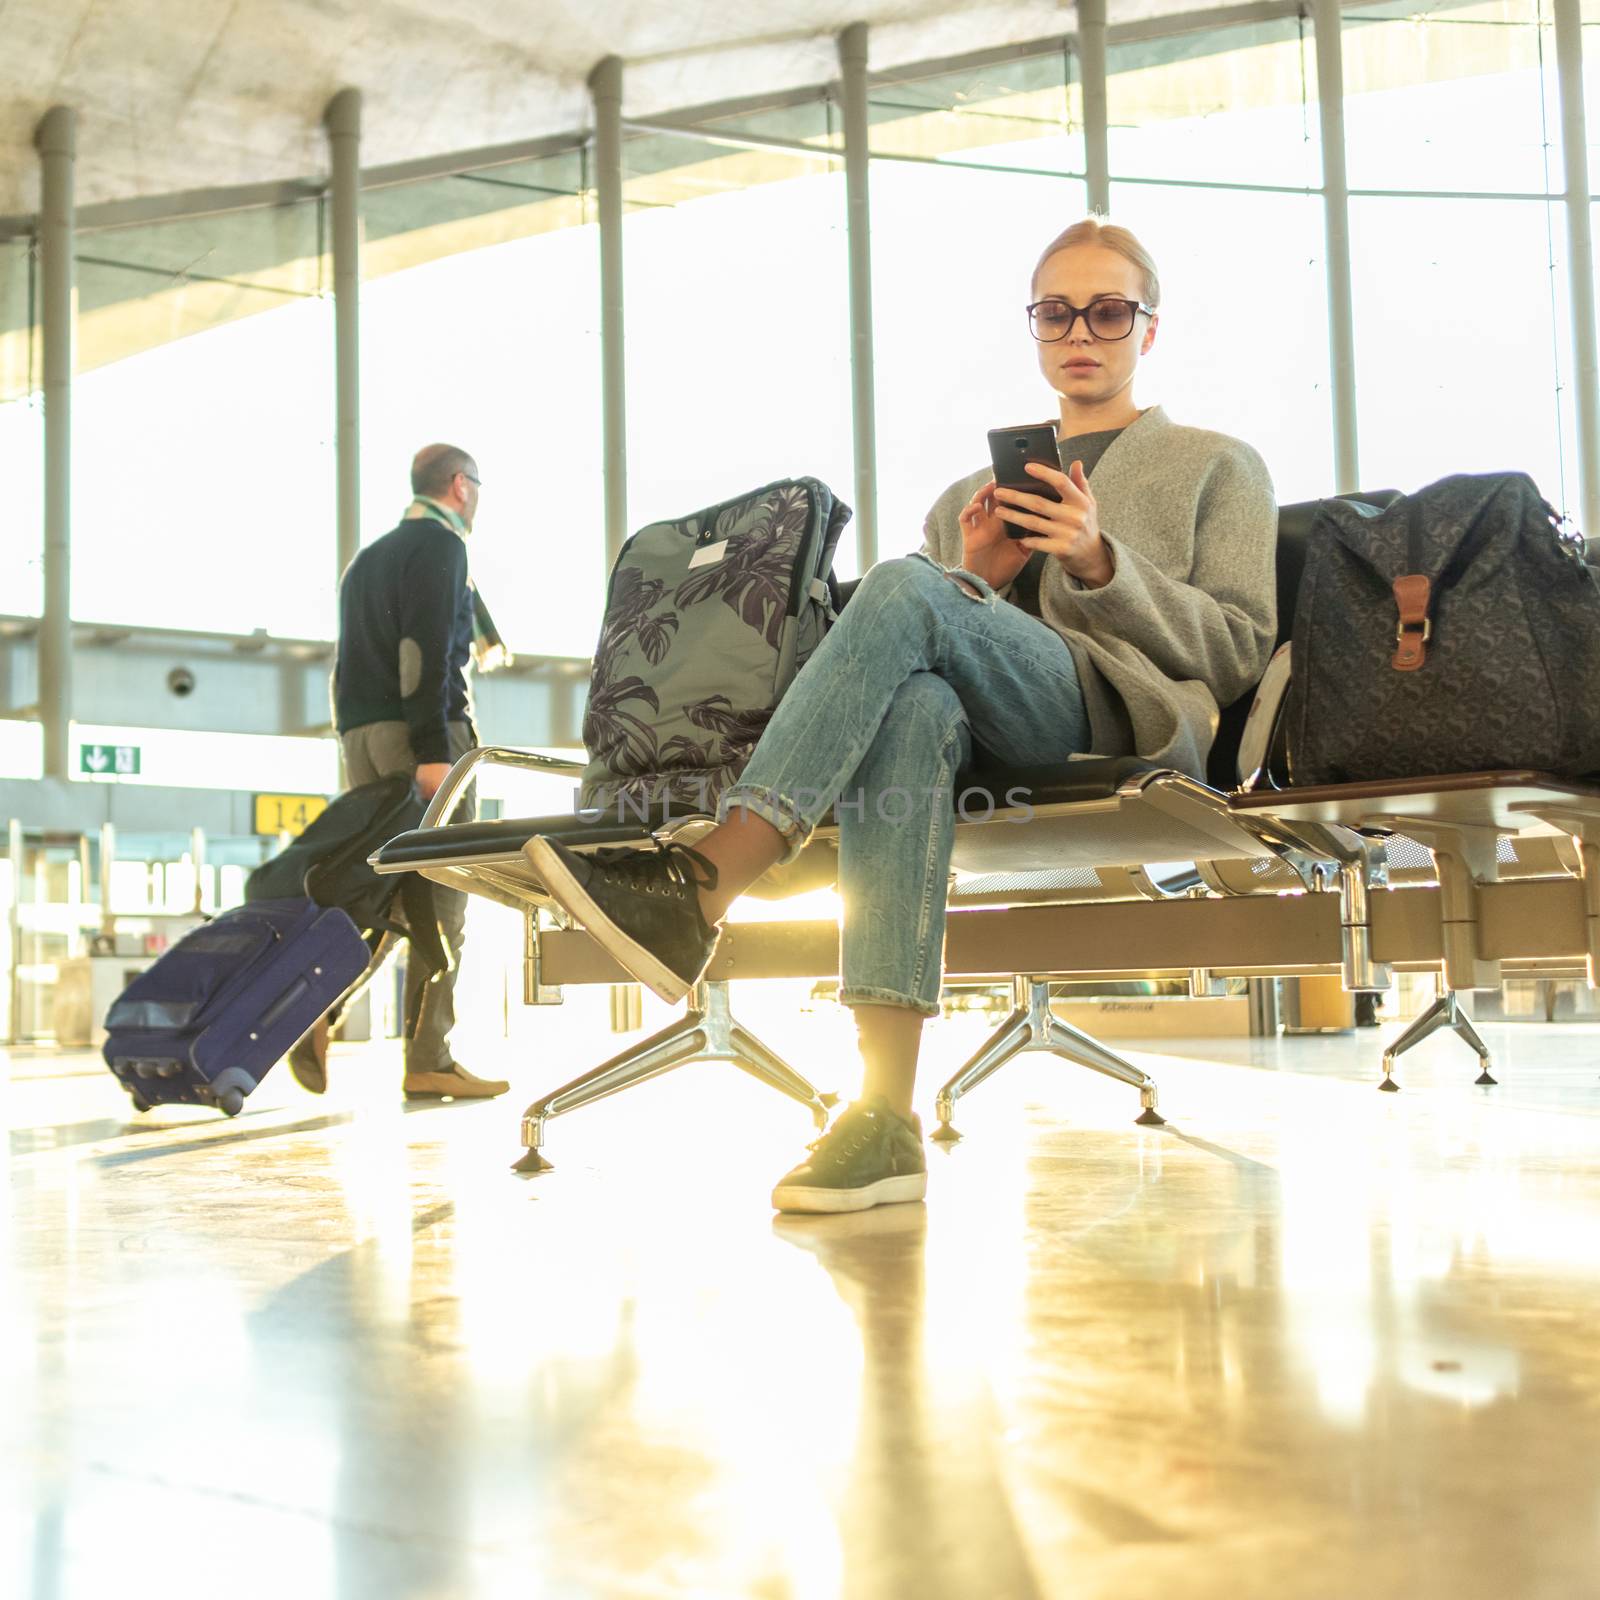 Casual blond young woman using her cell phone while waiting to board a plane at the departure gates at the airport terminal.